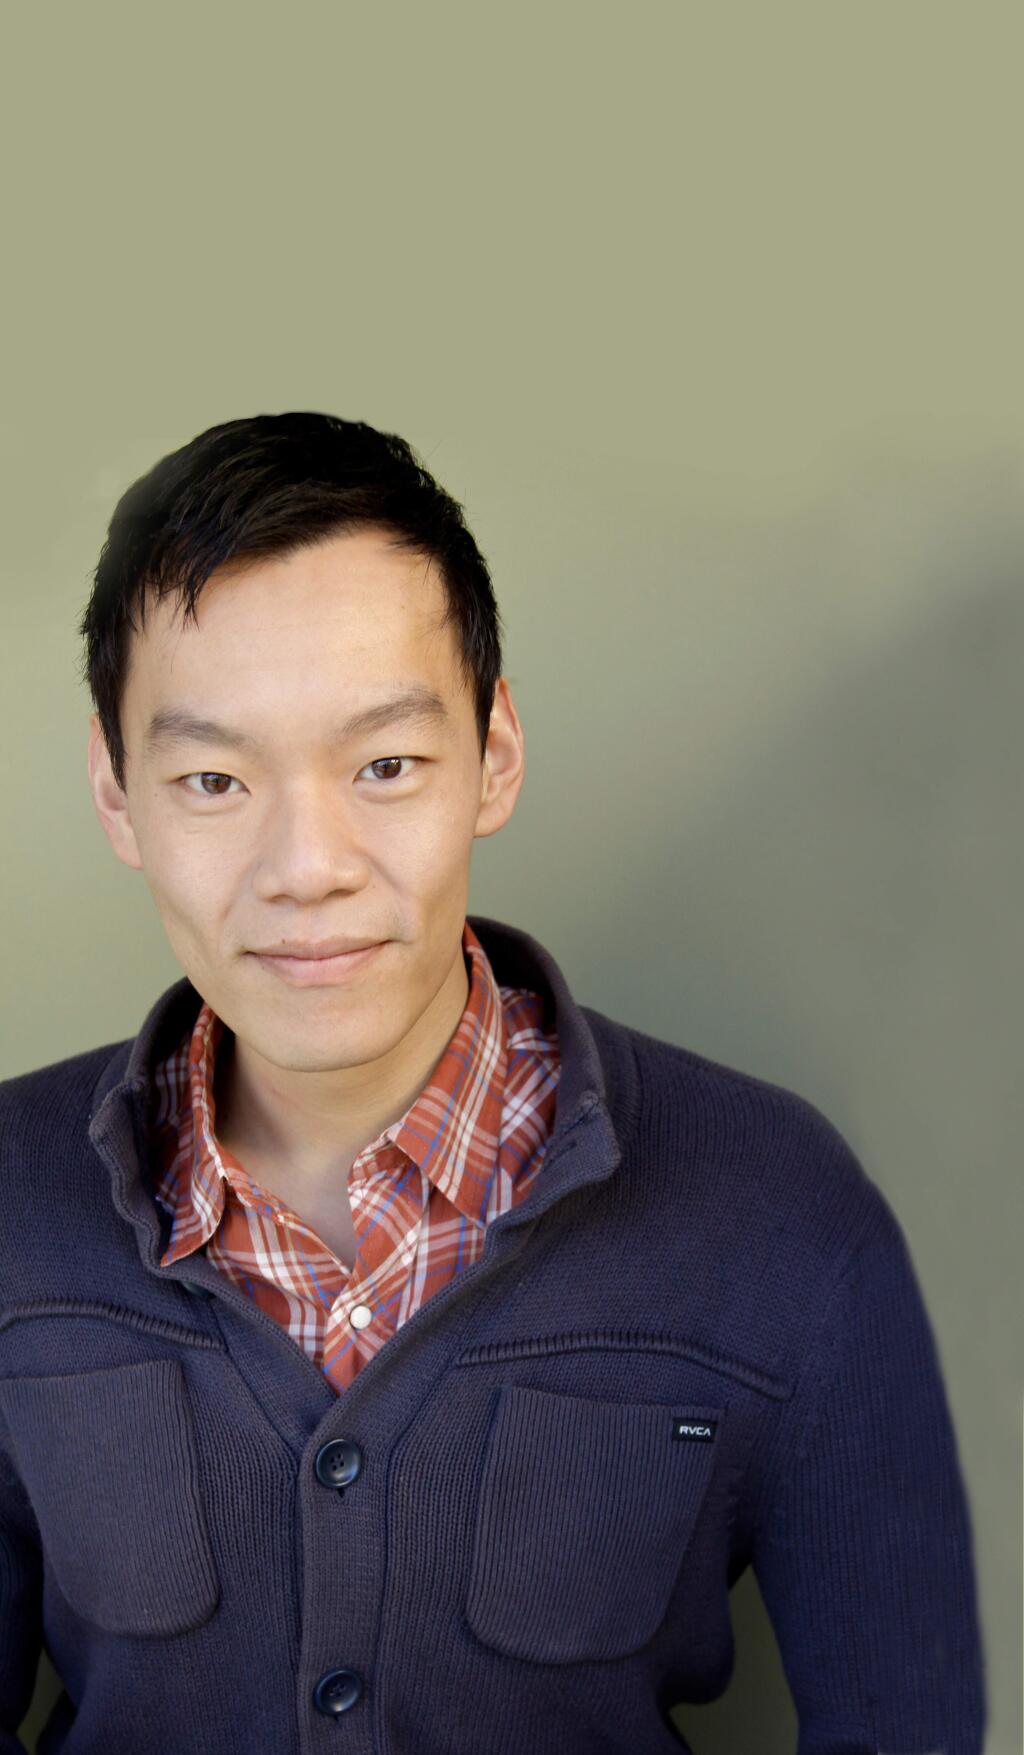 Aidan Park is a comedian, actor and advice blogger from Los Angeles, originally from South Korea. (AIDANPARK.COM)